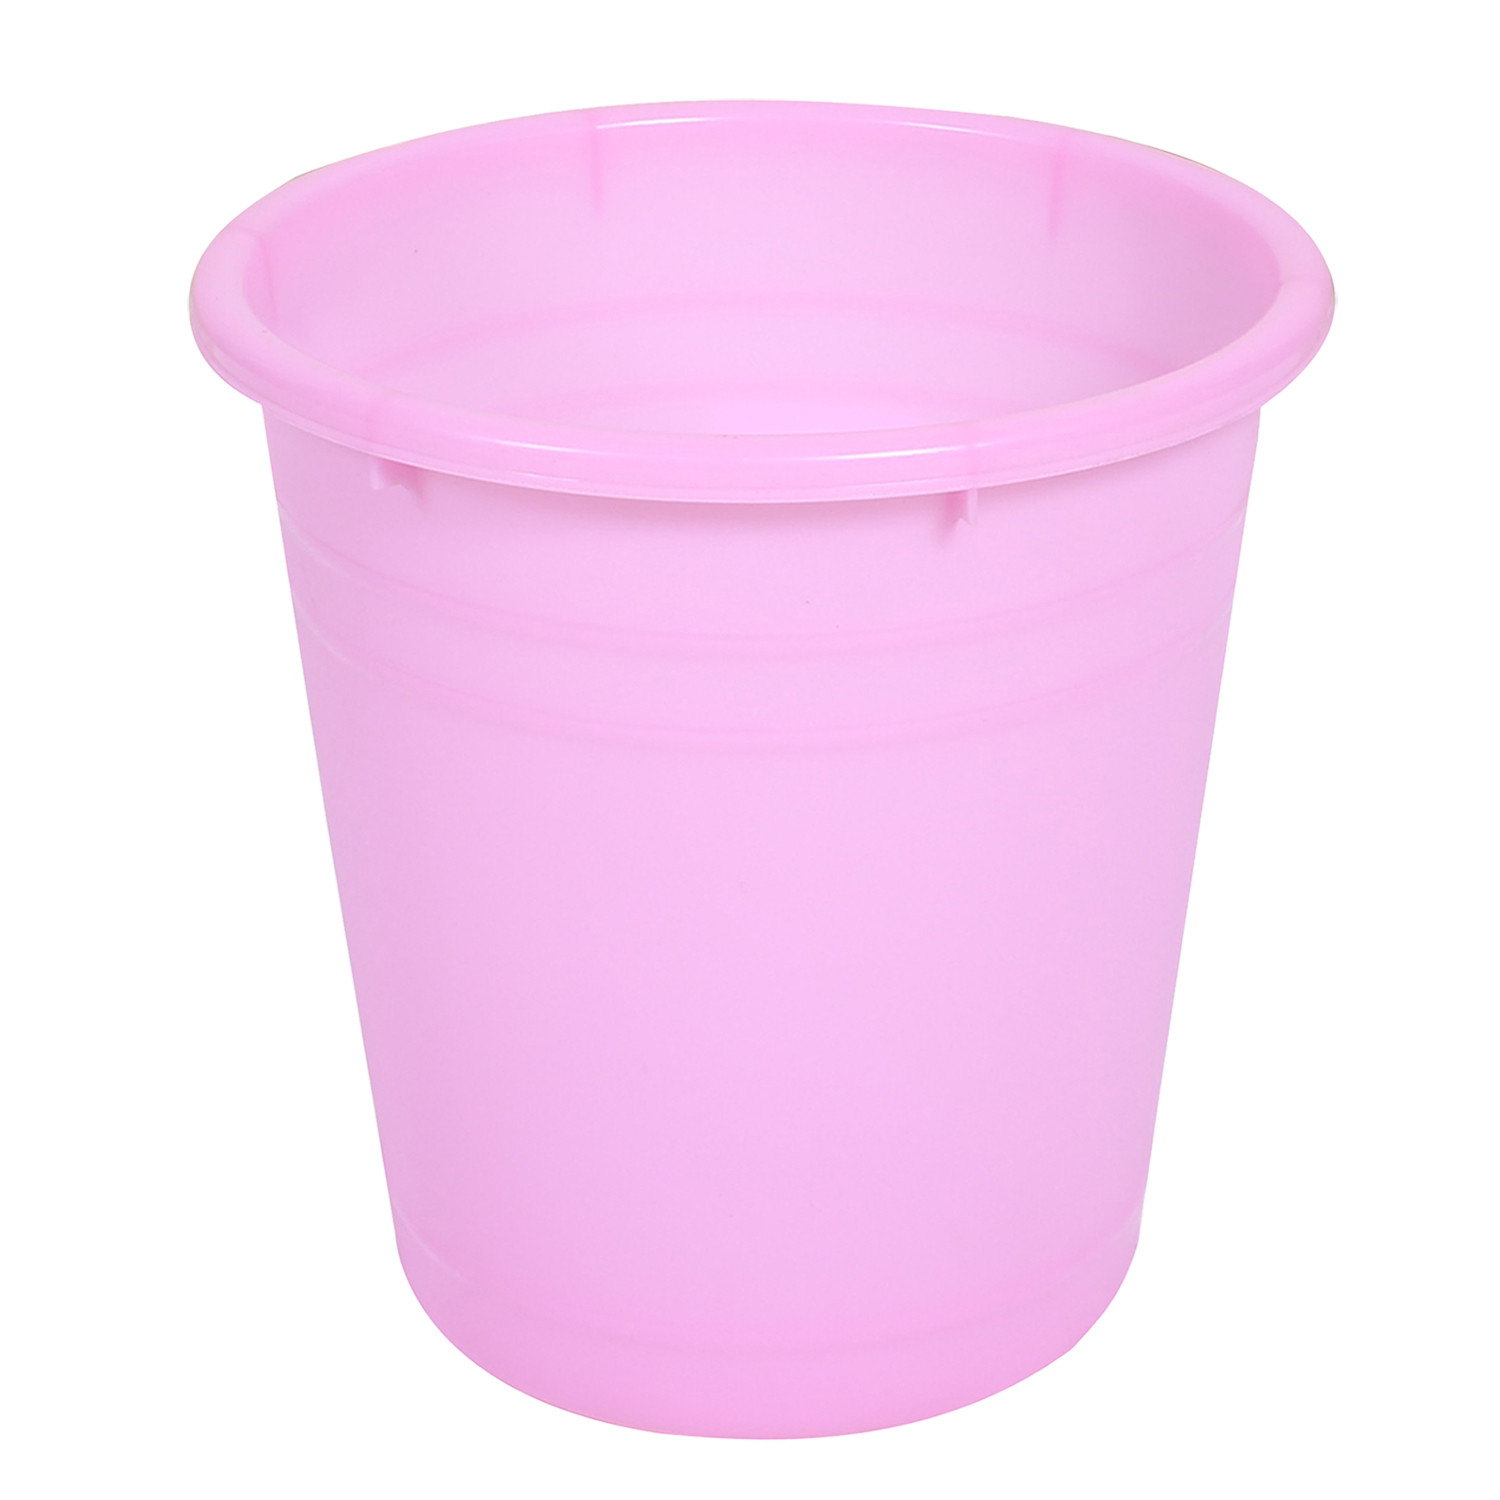 Kuber Industries Plastic Dustbin|Portable Garbage Basket & Round Trash Can for Home,Kitchen,Office,College,7 Ltr.(Pink)